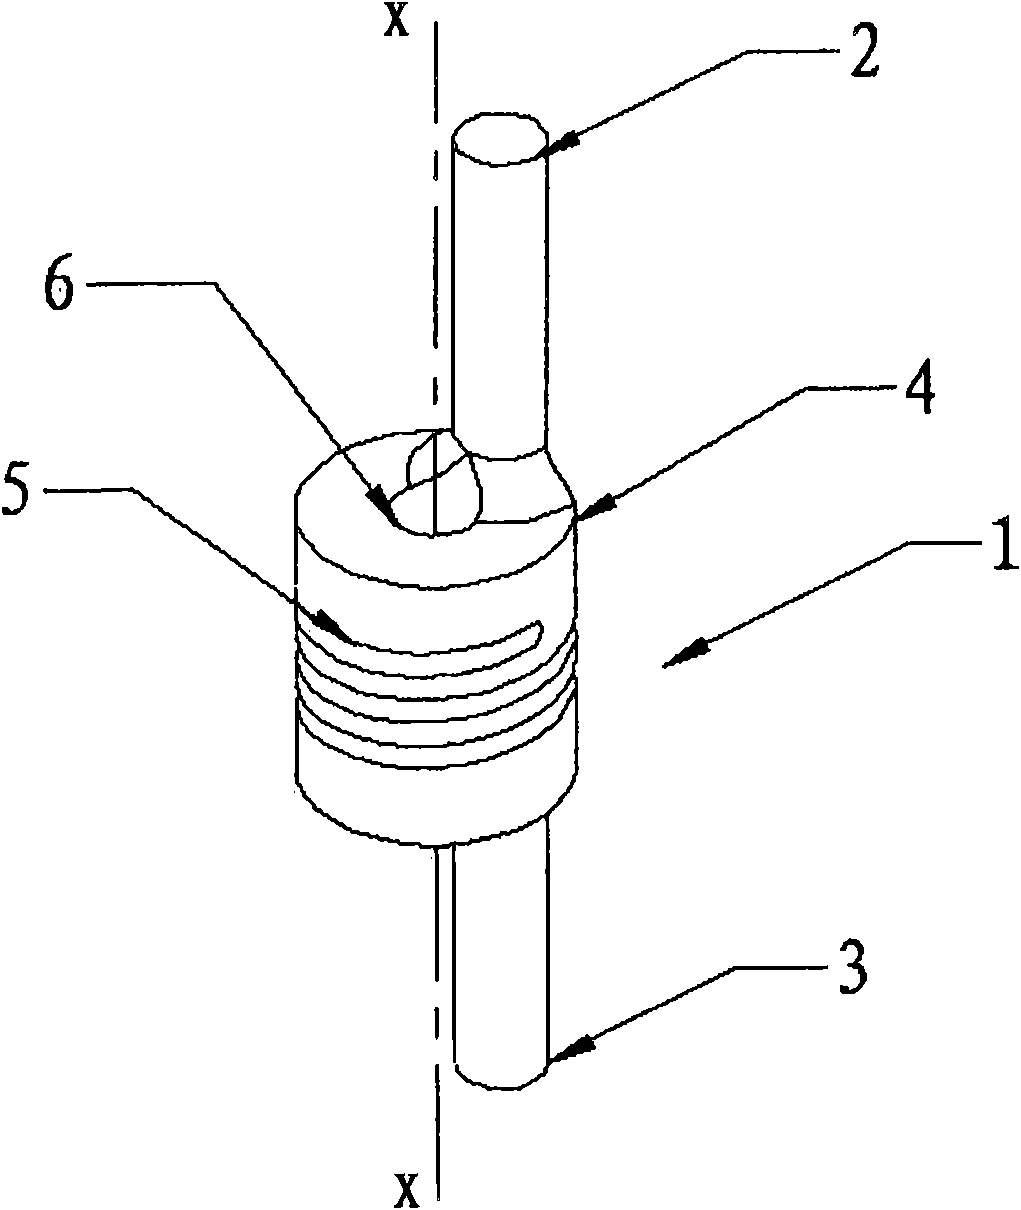 Spinal column dynamic connection rod